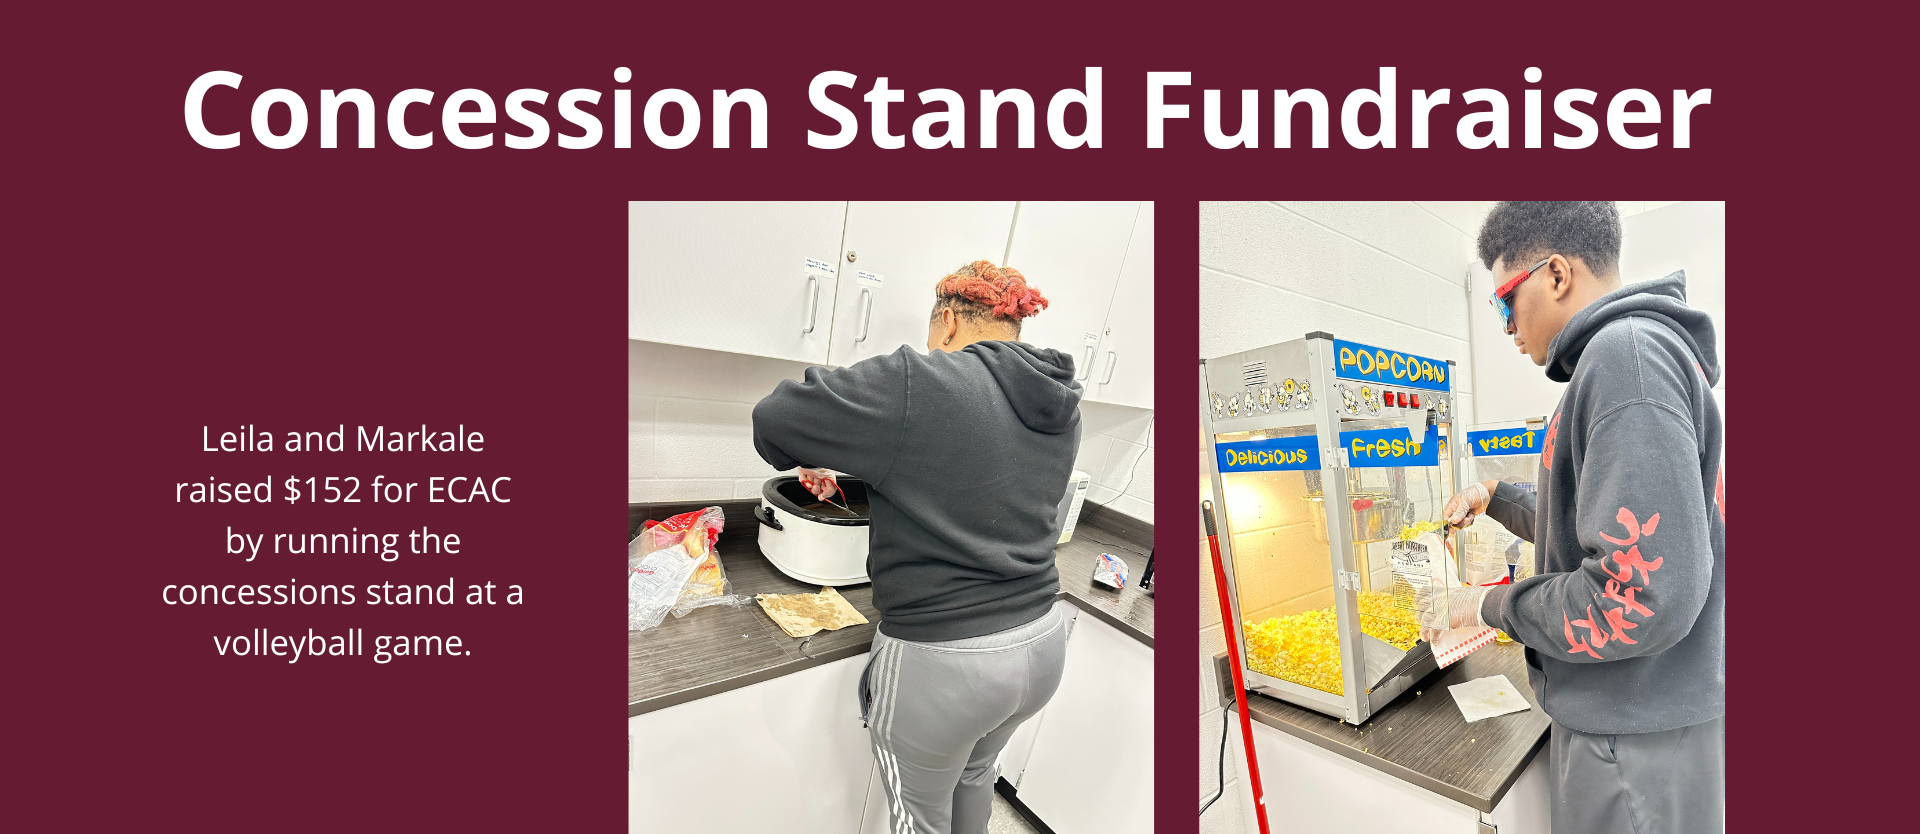 Concession Stand Fundraiser picture